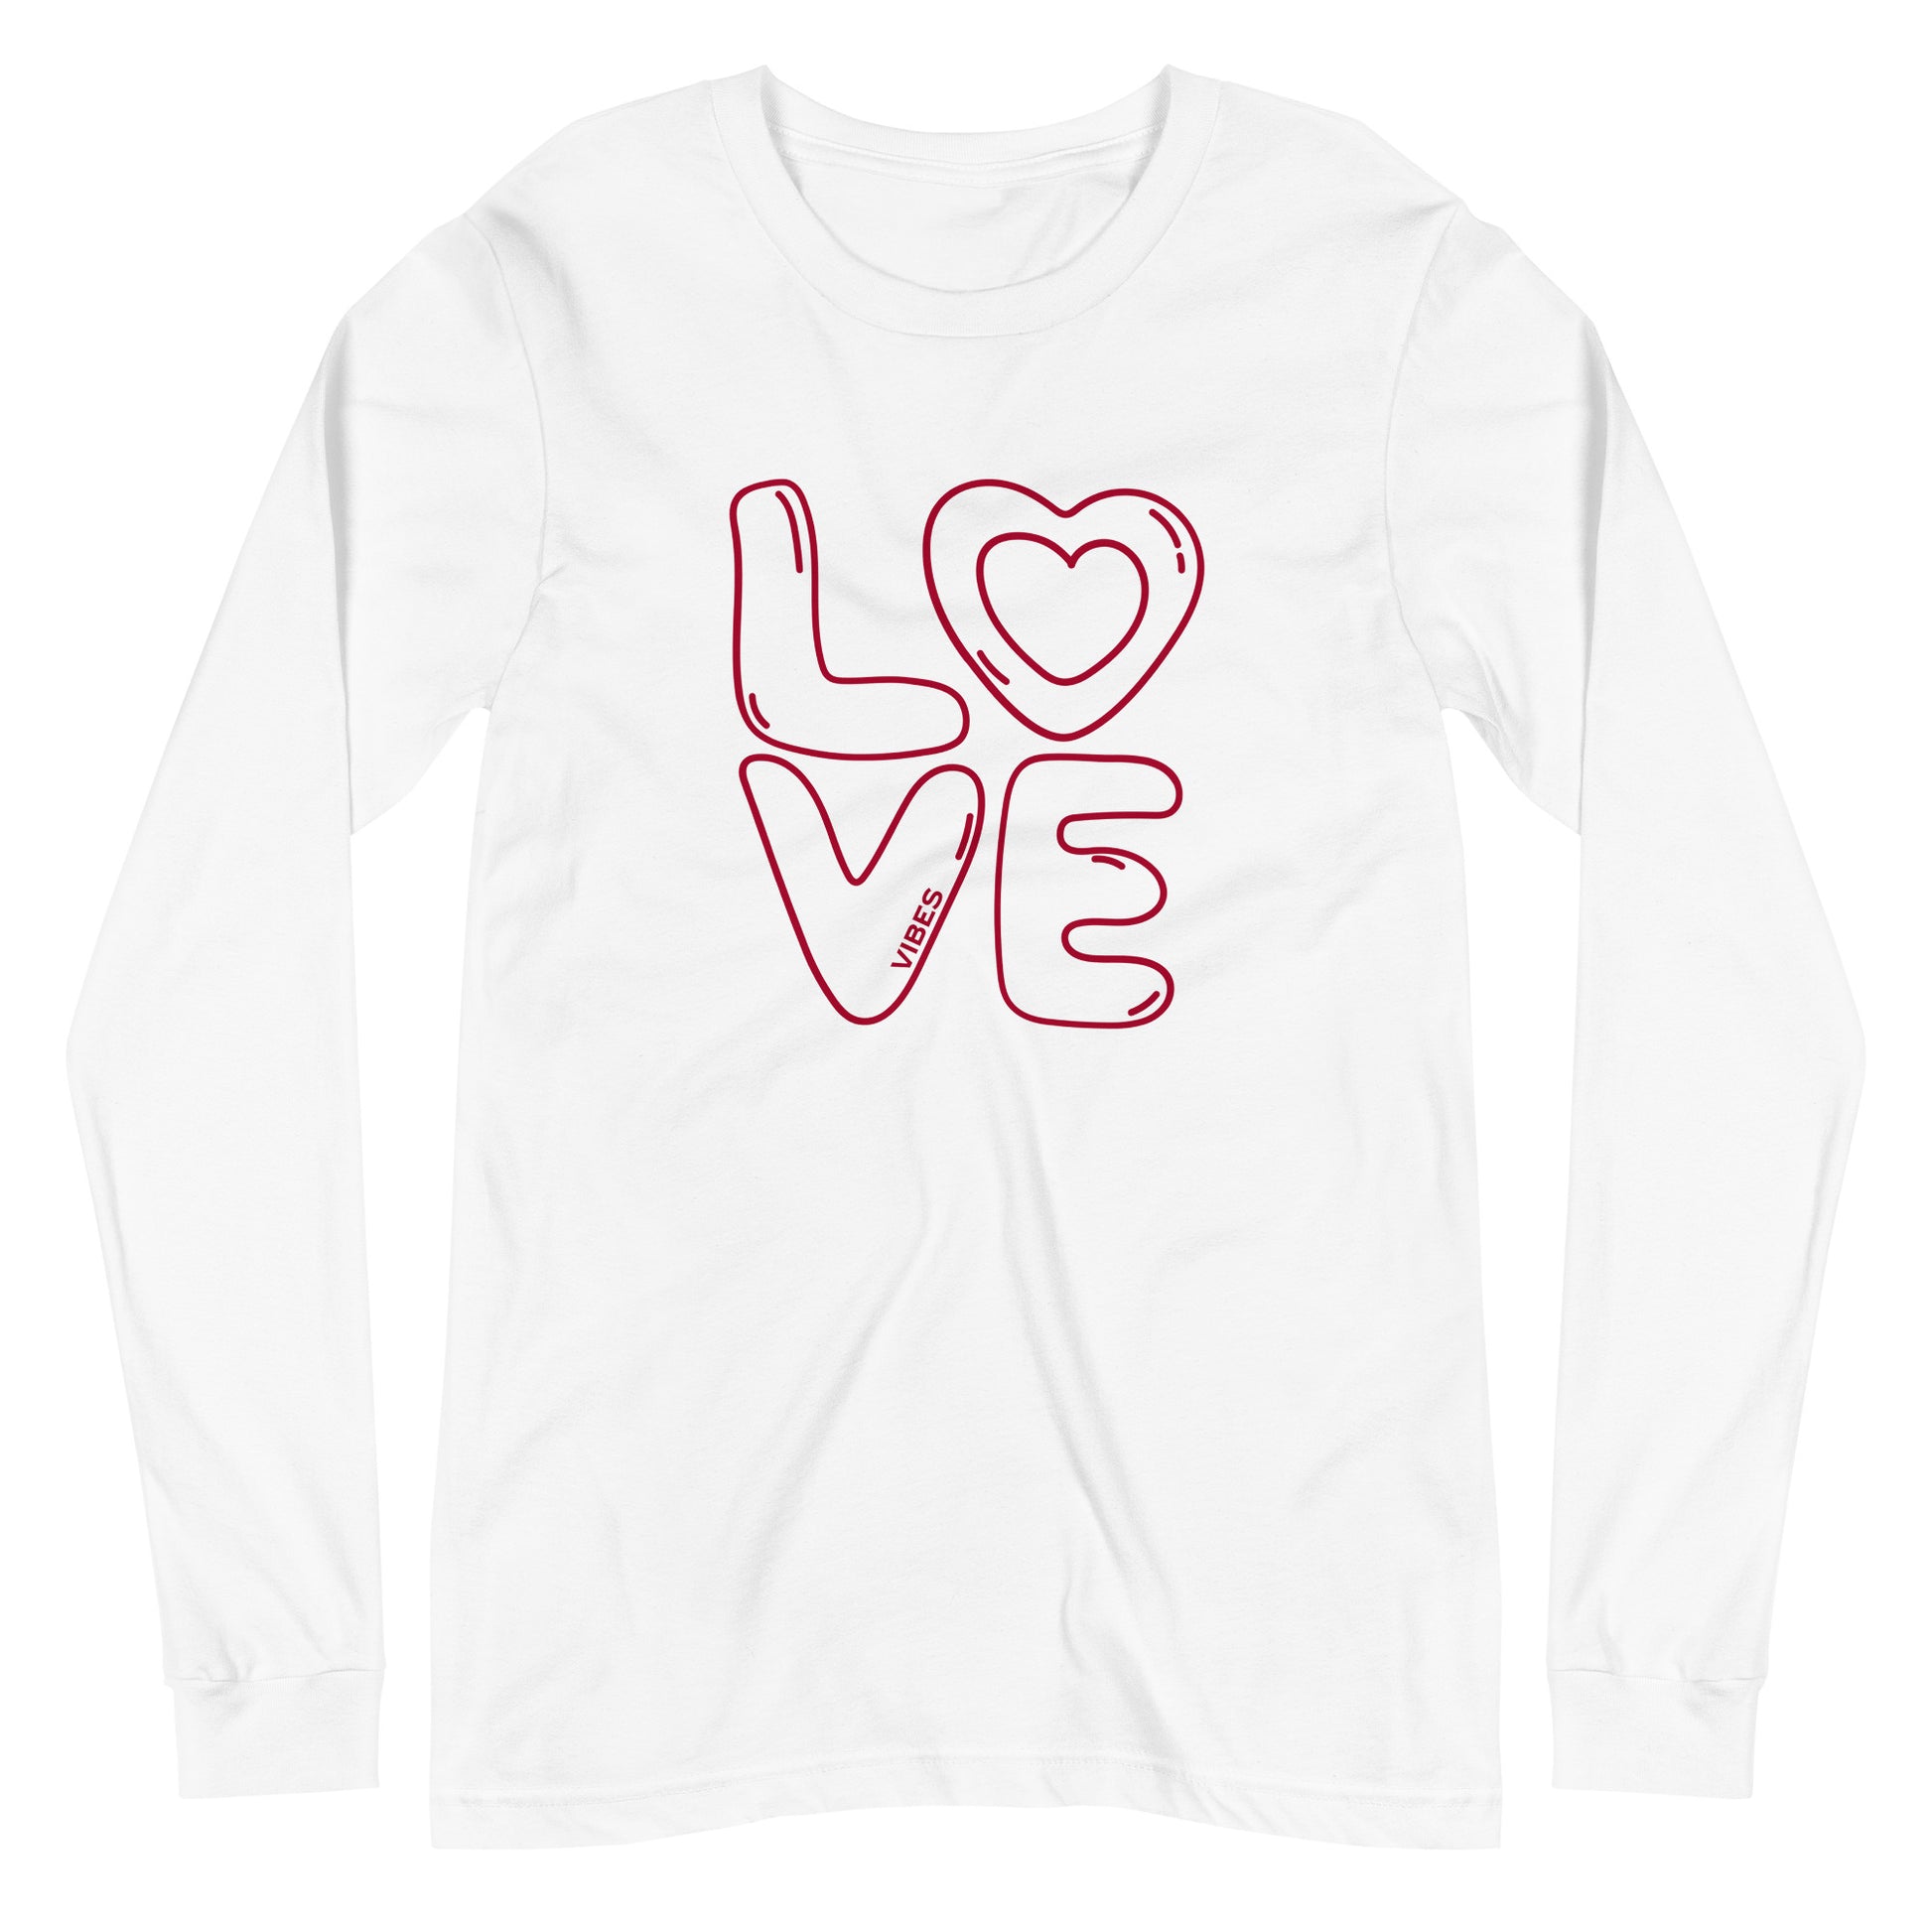 TIME OF VIBES - Long Sleeve Tee LOVE (White) - €39.00